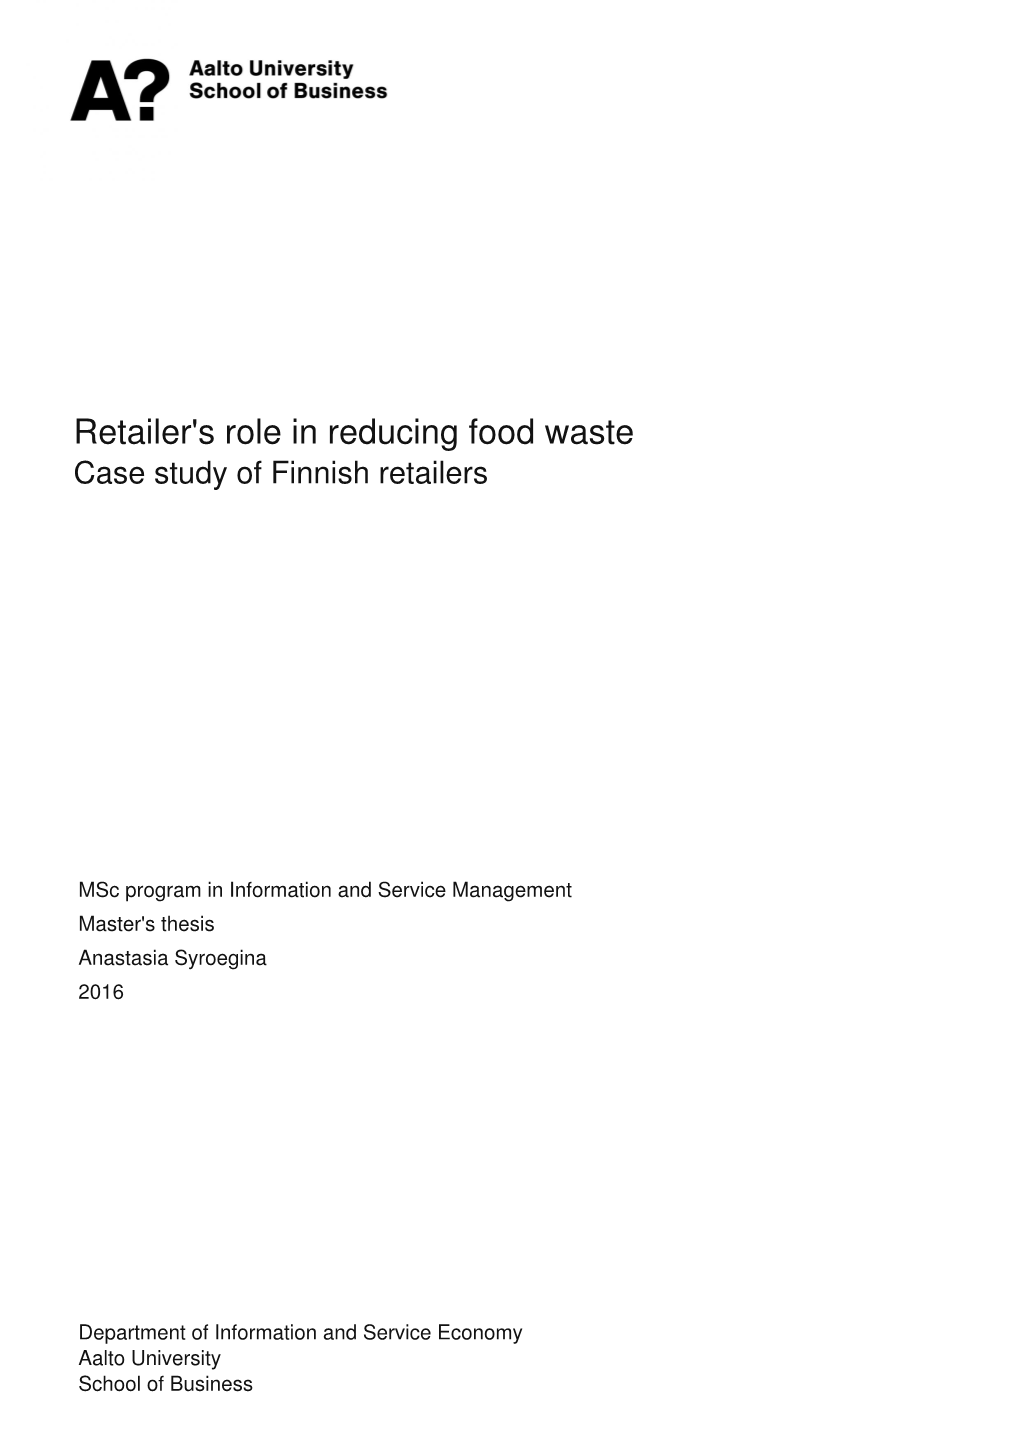 Retailer's Role in Reducing Food Waste Case Study of Finnish Retailers